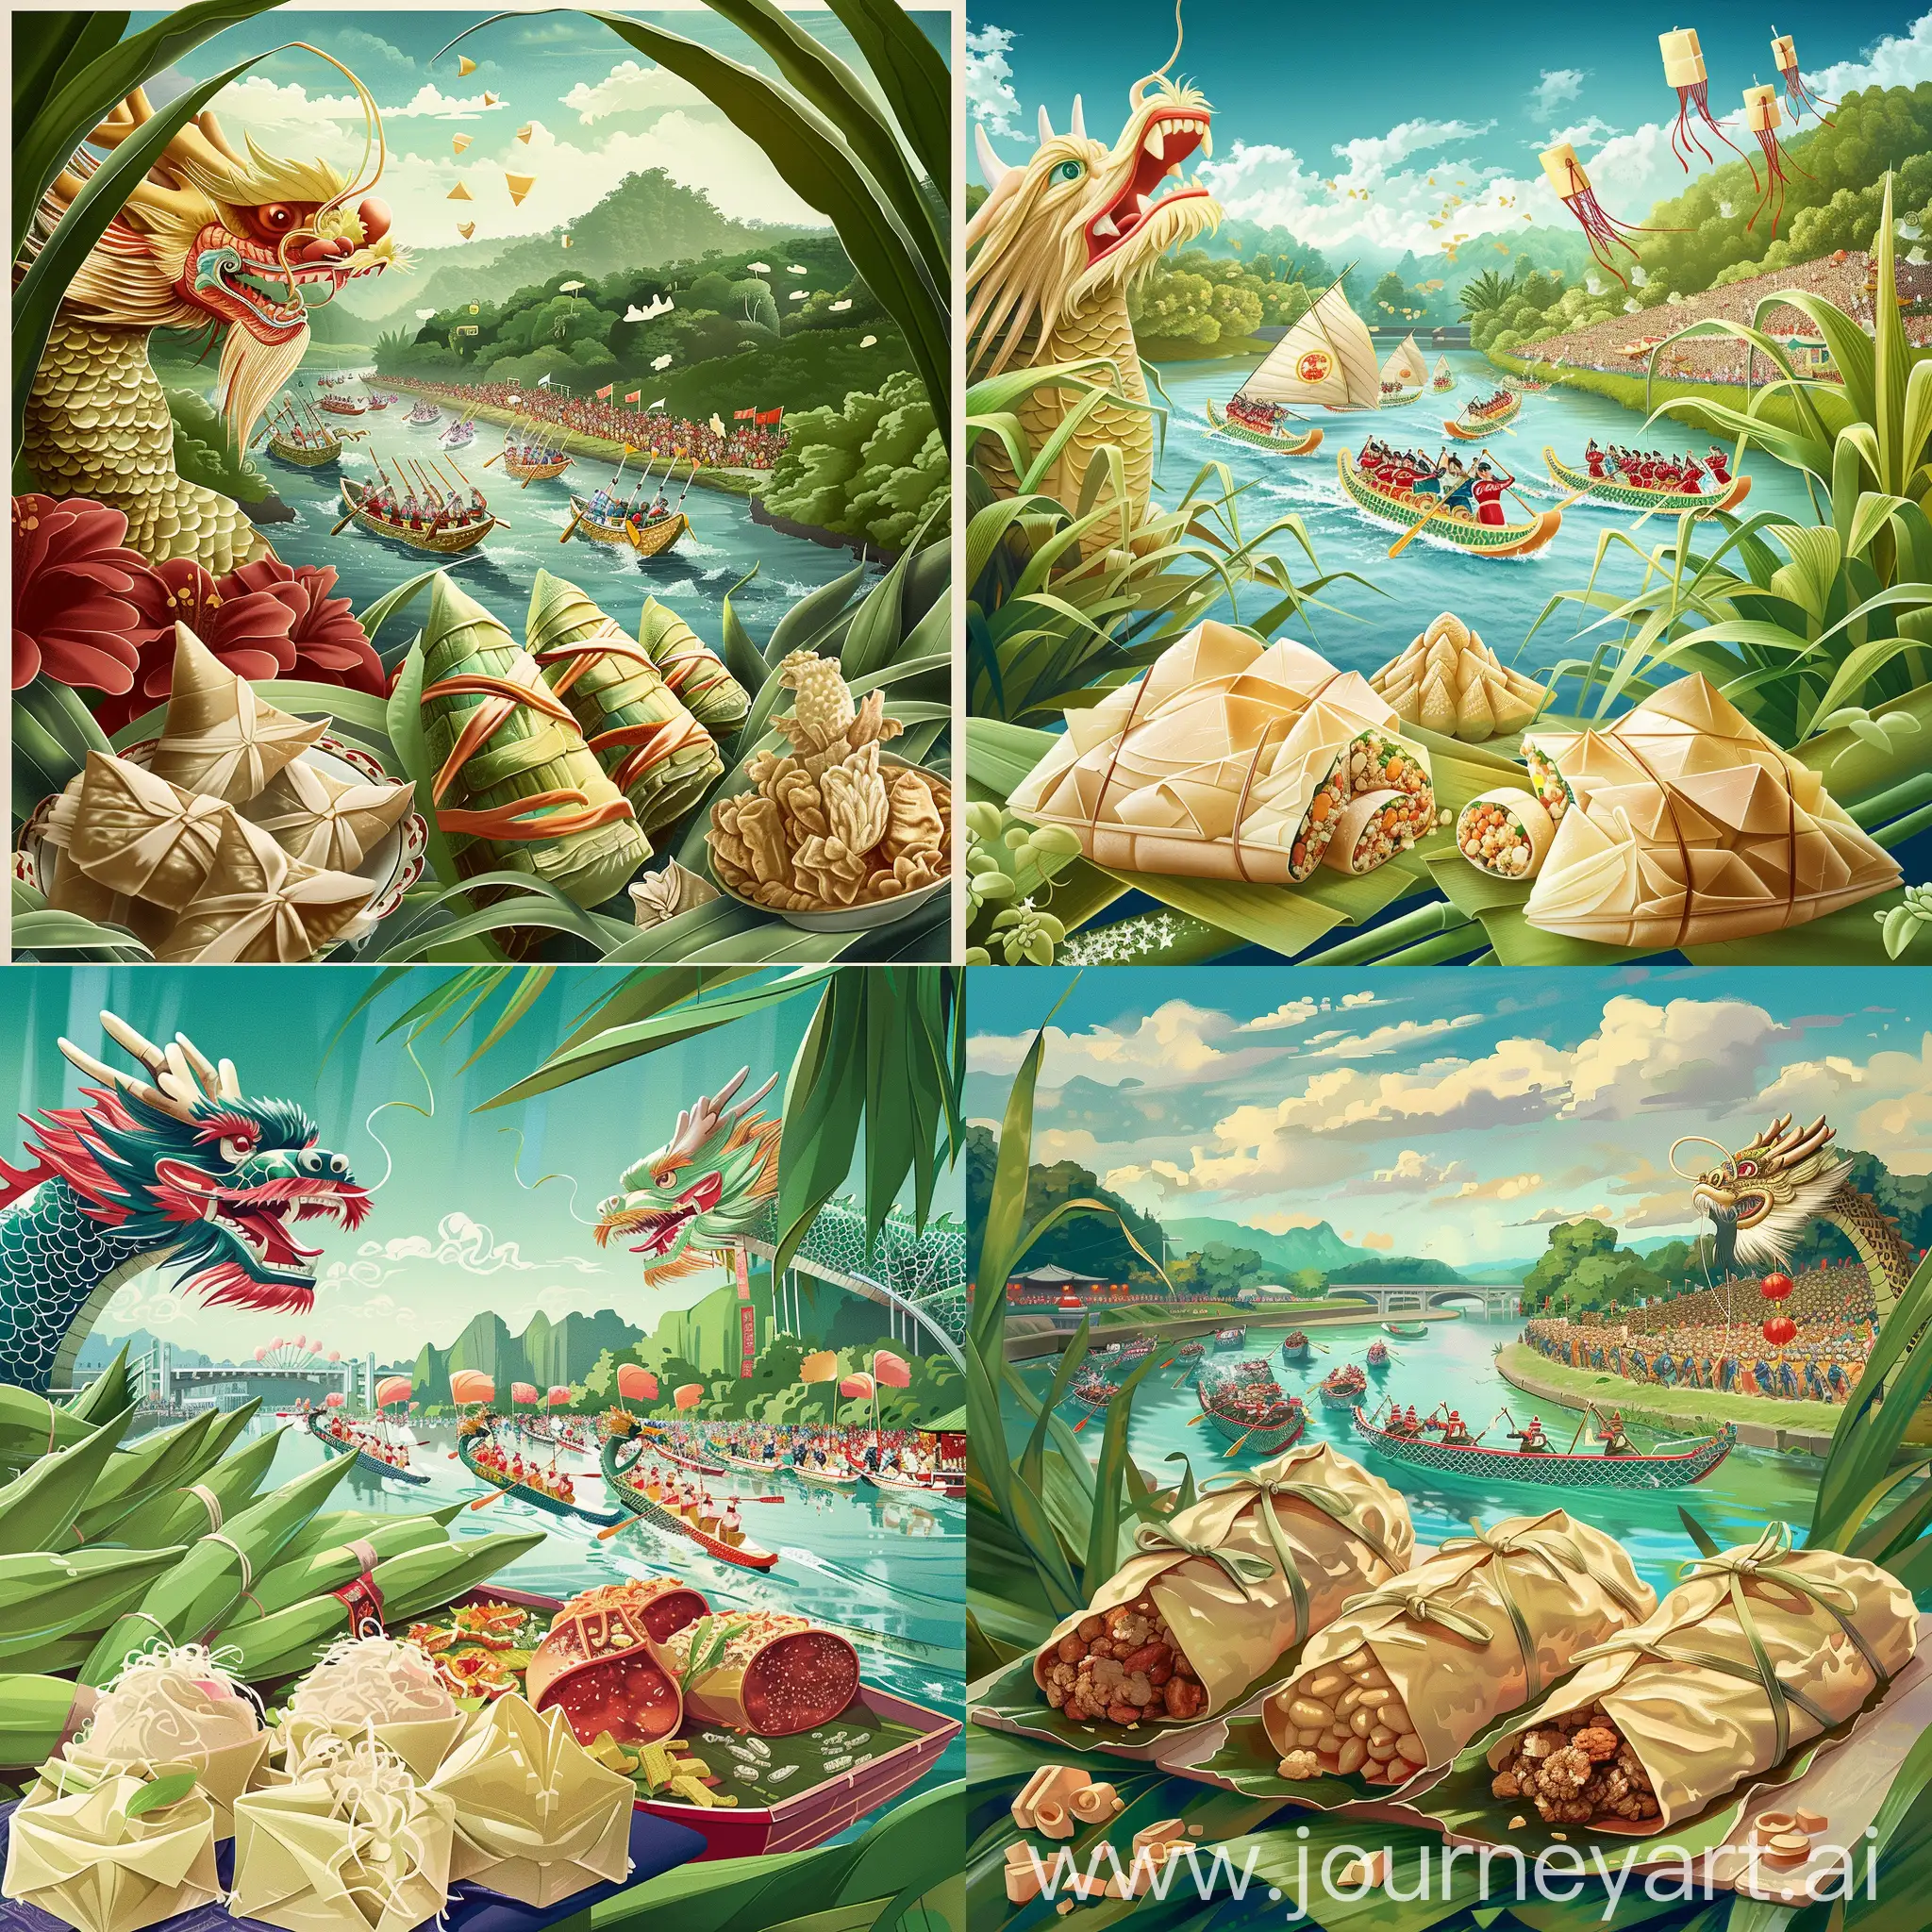 "Create a vibrant and festive poster for the Dragon Boat Festival, celebrated in China. The poster should capture the essence of the festival, combining traditional and modern elements. The foreground should feature intricately detailed zongzi, showcasing their bamboo leaf wrappings and the variety of fillings, symbolizing abundance and luck. In the background, illustrate an energetic and colorful dragon boat race with teams of paddlers in traditional attire, their dragon boats adorned with elaborate dragon heads and tails, slicing through water with determination and teamwork. The scene should be set against a picturesque backdrop of a river flowing through lush greenery, with spectators cheering from the banks under a clear, sunny sky. Integrate elements such as the Double Fifth Festival's symbolic motifs, including the five-color threads and fragrant sachets, to enhance the cultural depth. Use a palette of vibrant greens, blues, and reds to convey the festival's lively and joyful atmosphere. The overall style should be a harmonious blend of realism and stylization, capturing the viewer's imagination and honoring the rich heritage of the Dragon Boat Festival."